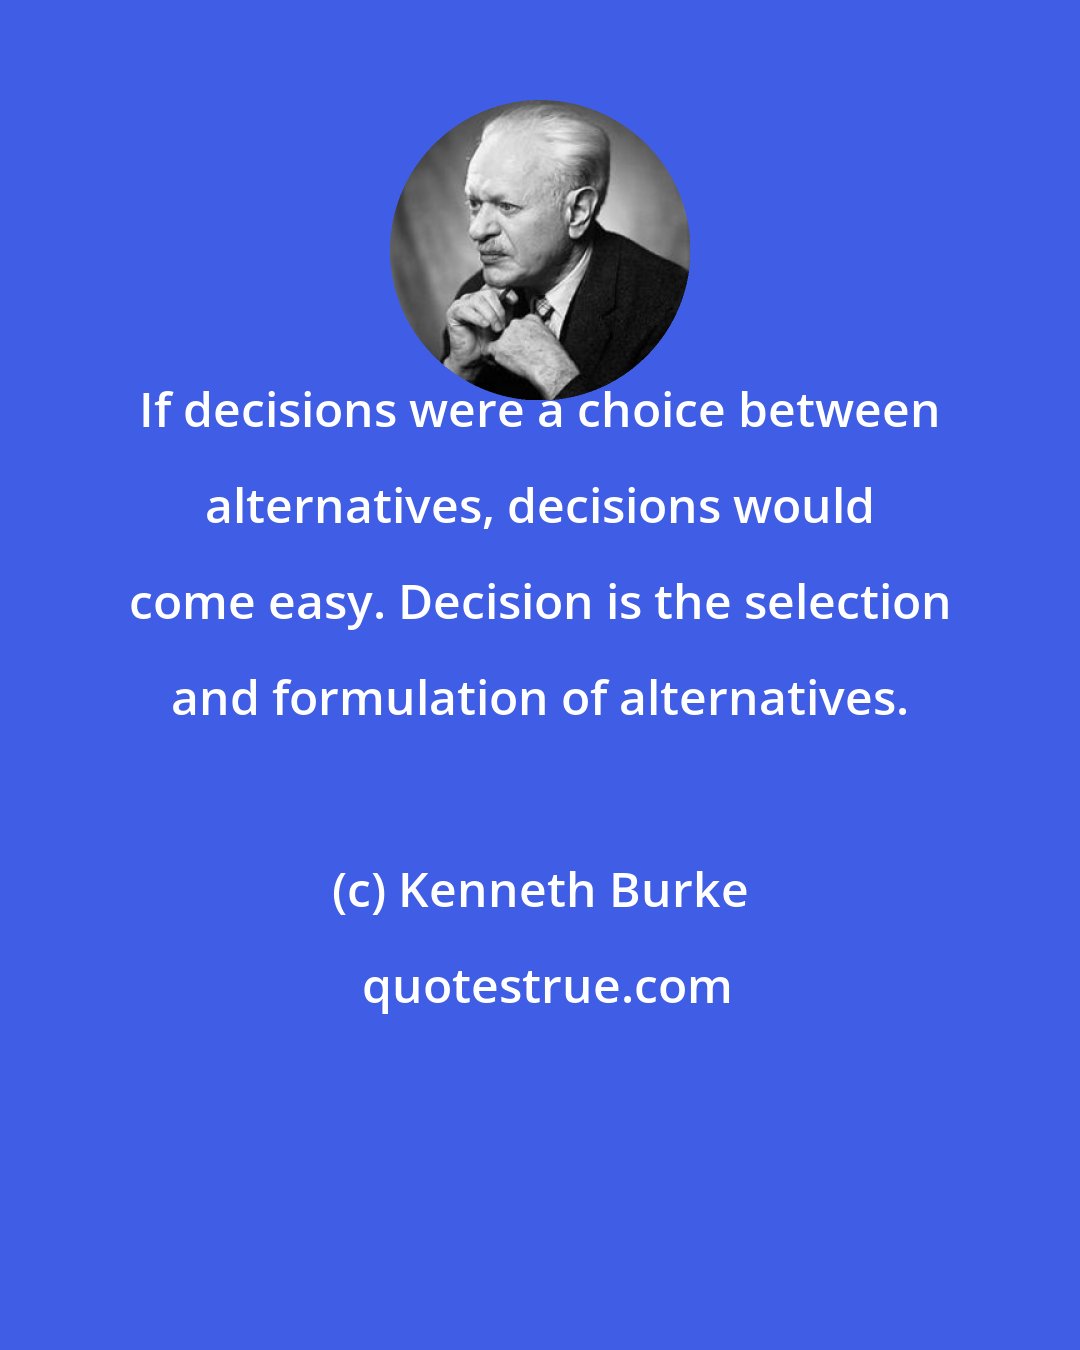 Kenneth Burke: If decisions were a choice between alternatives, decisions would come easy. Decision is the selection and formulation of alternatives.